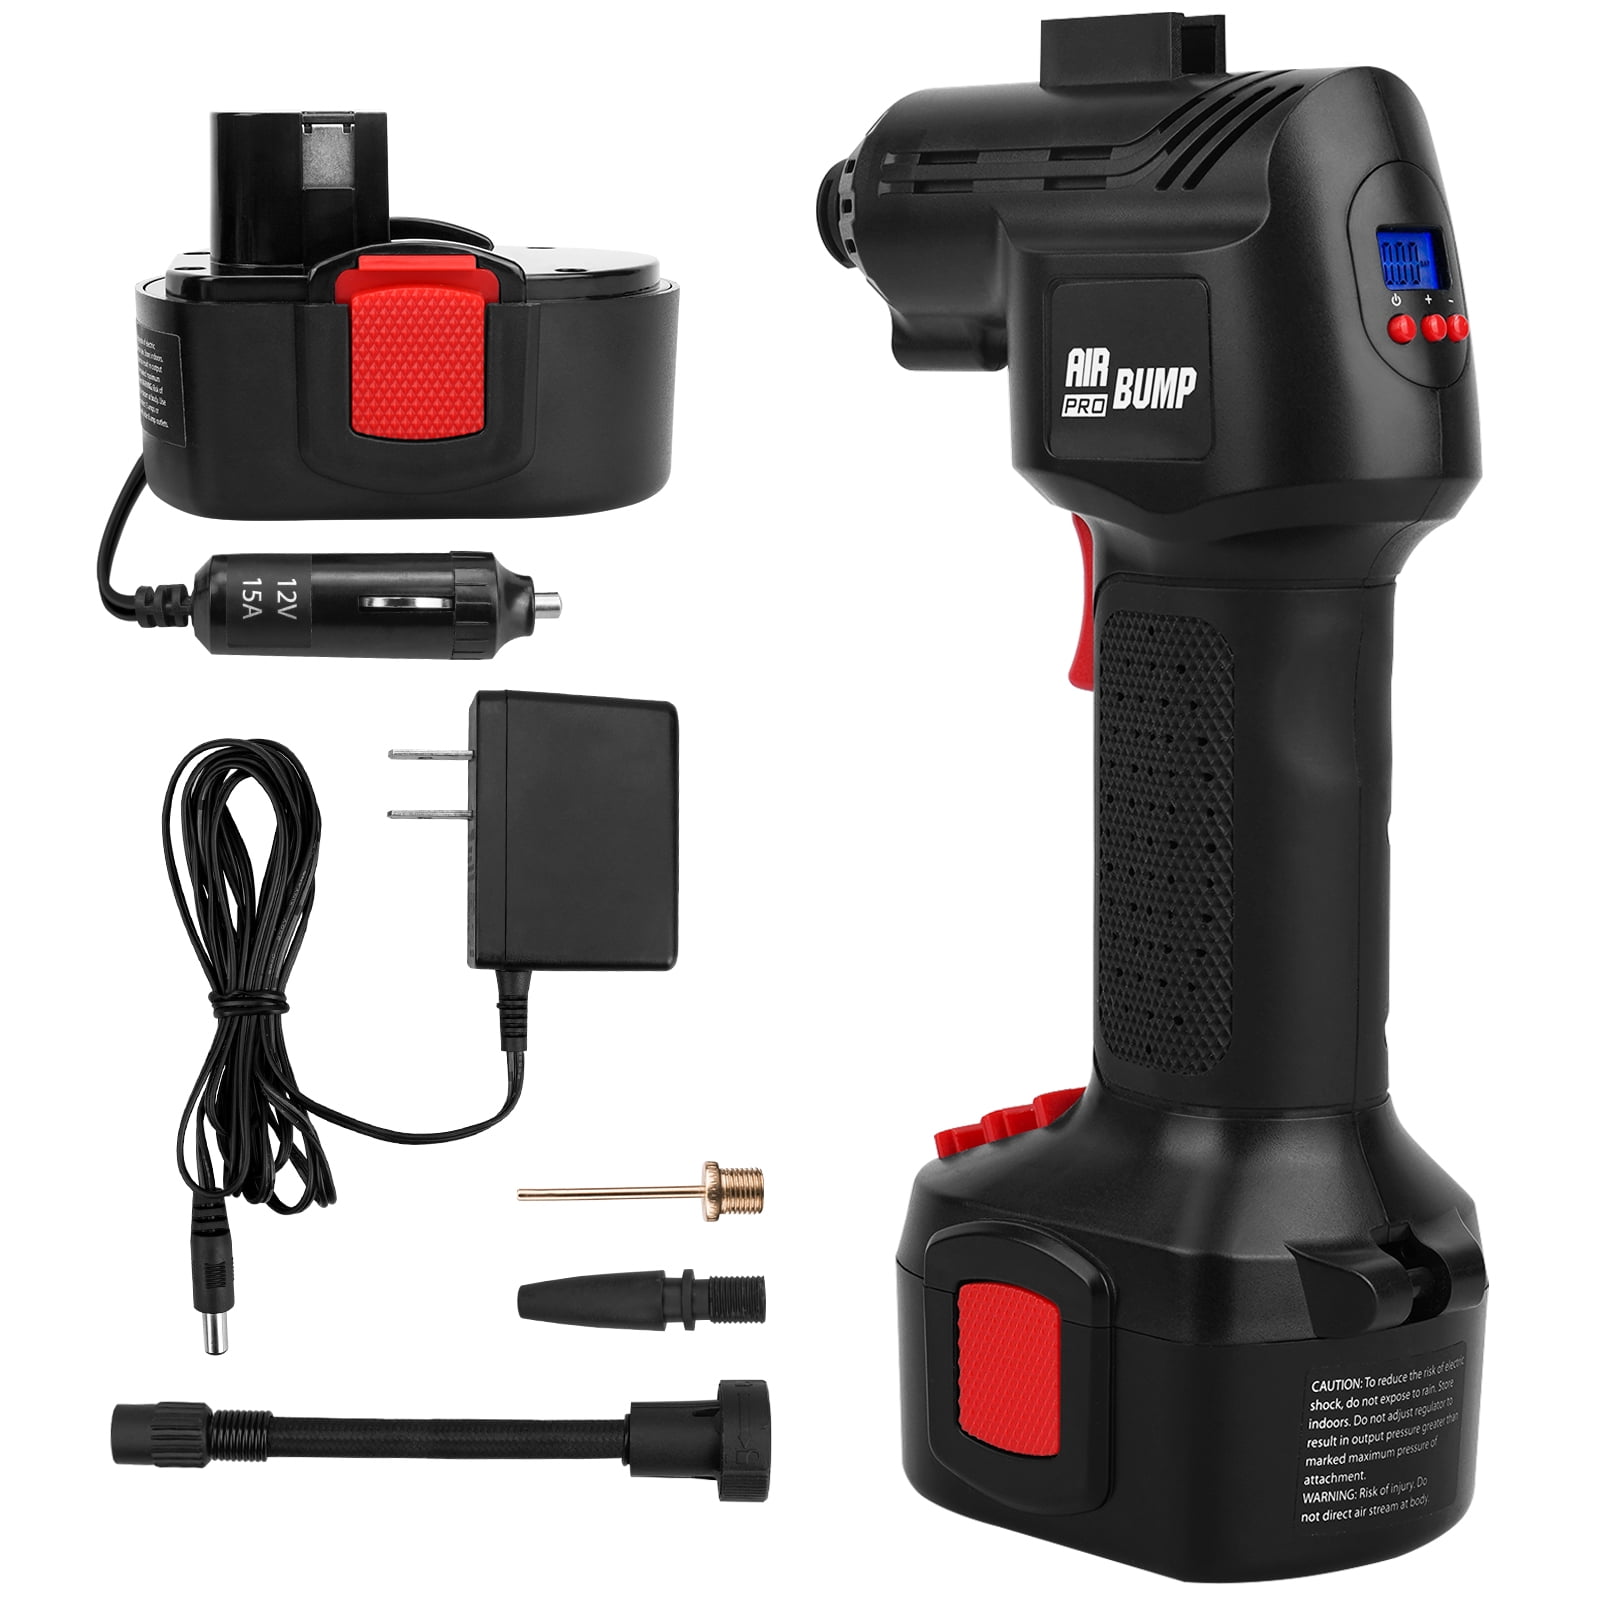 Cordless Portable Air Pump Pro Tire Inflator, Automatic Compressor with 12V Auto  Shutoff Digital Pressure Gauge for Inflating Tires, Air Beds, Sporting &  Pool Equipments. 